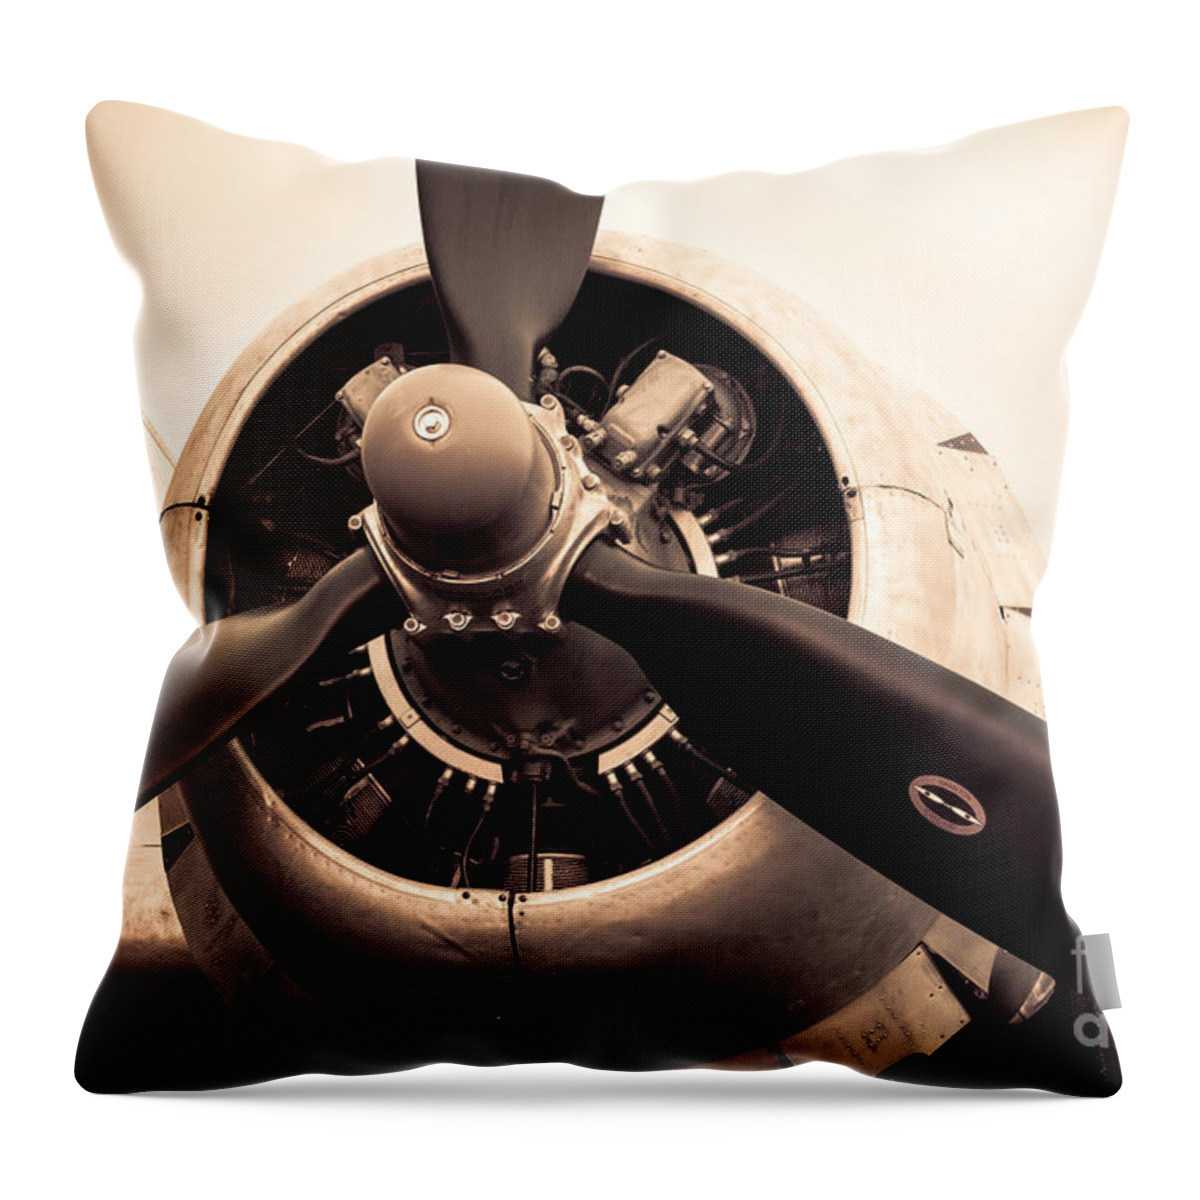 C-47 Throw Pillow featuring the photograph C-47 Engine Sepia by Lawrence Burry